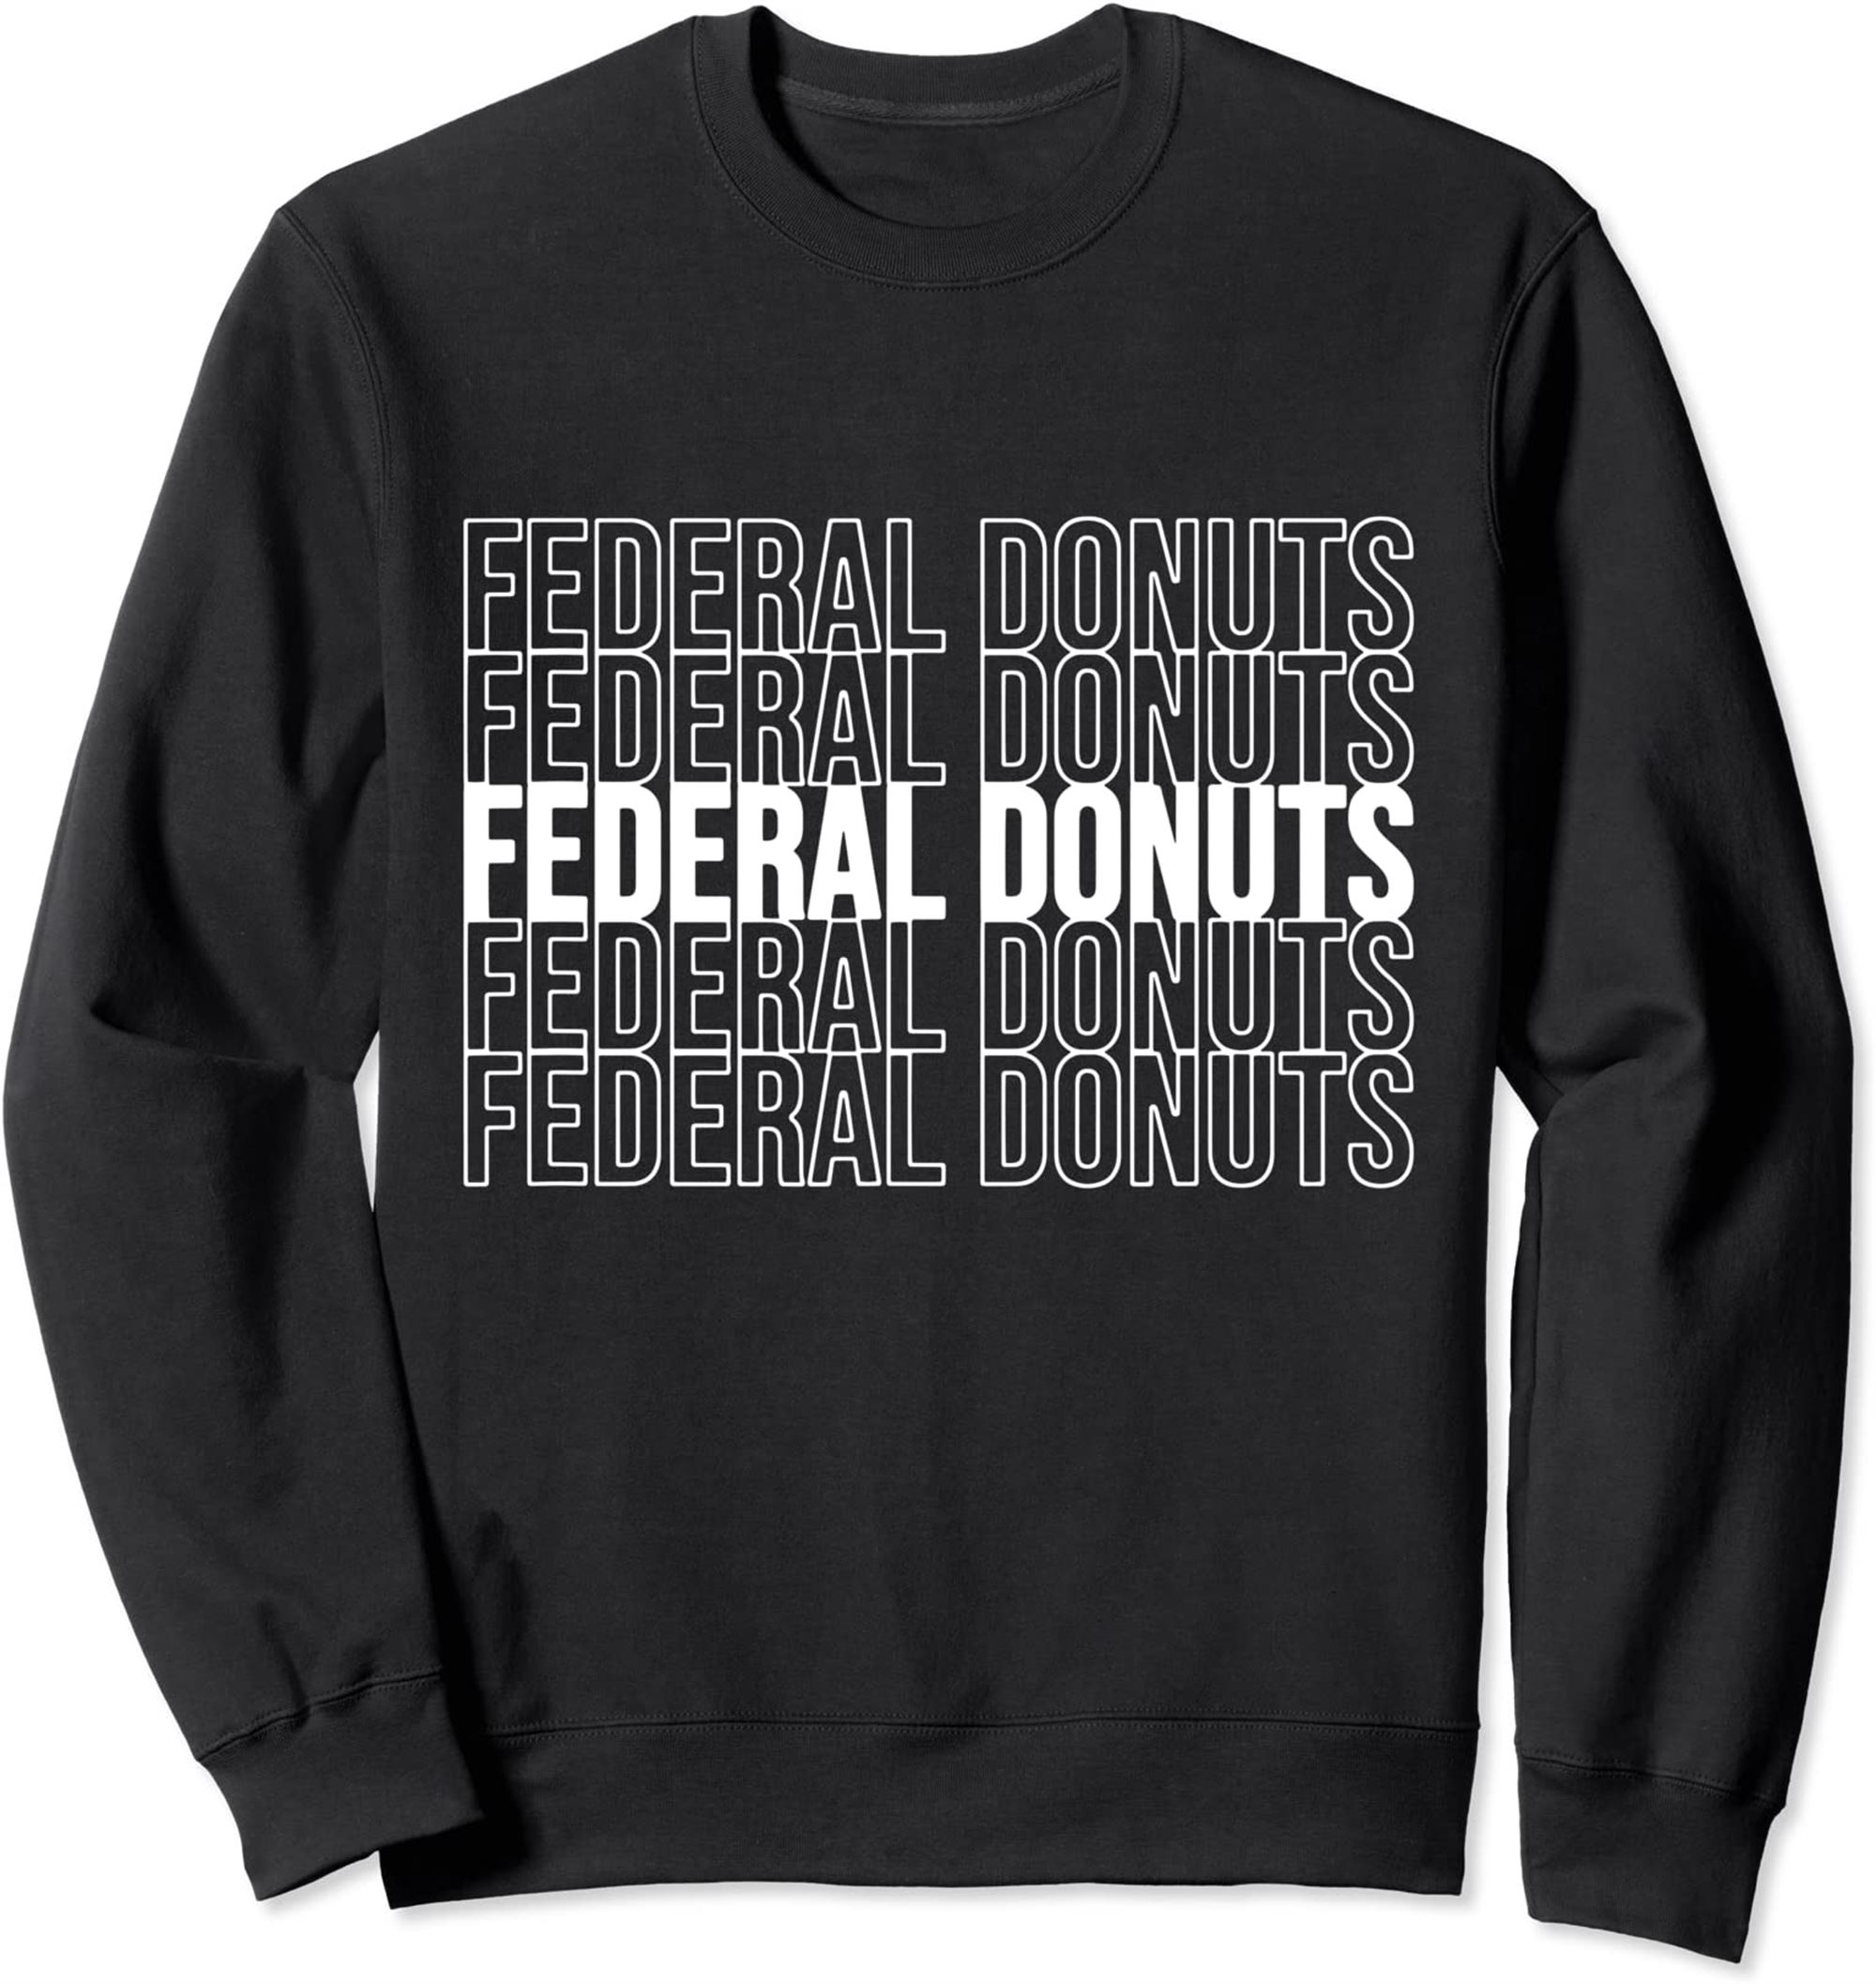 Federal Donuts Sweatshirt Full Size Up To 5xl